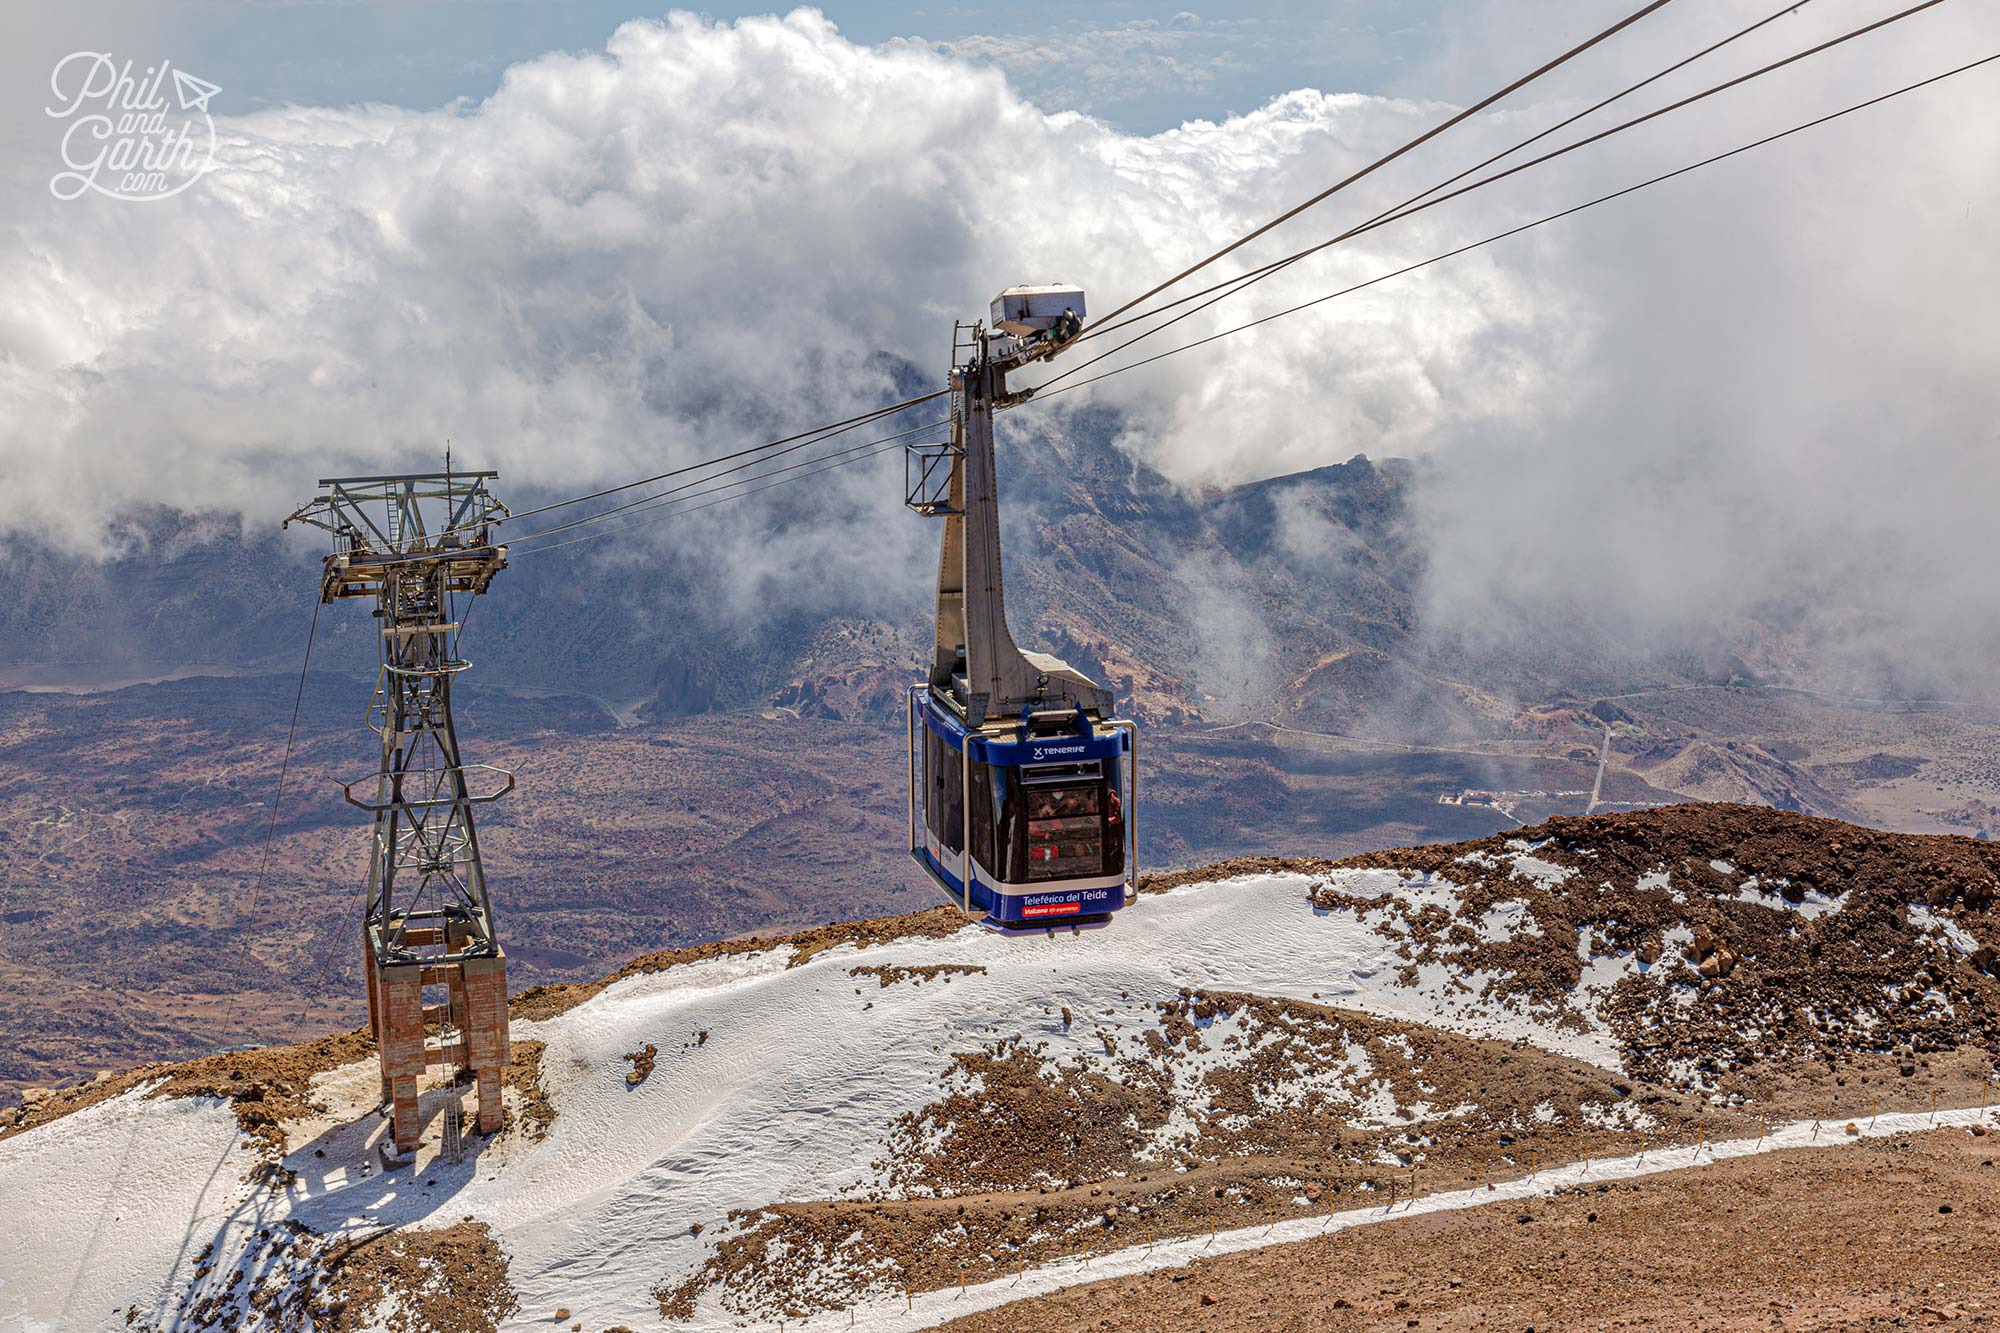 The El Teide cable car takes takes 8 minutes to travel up 3,555 metres